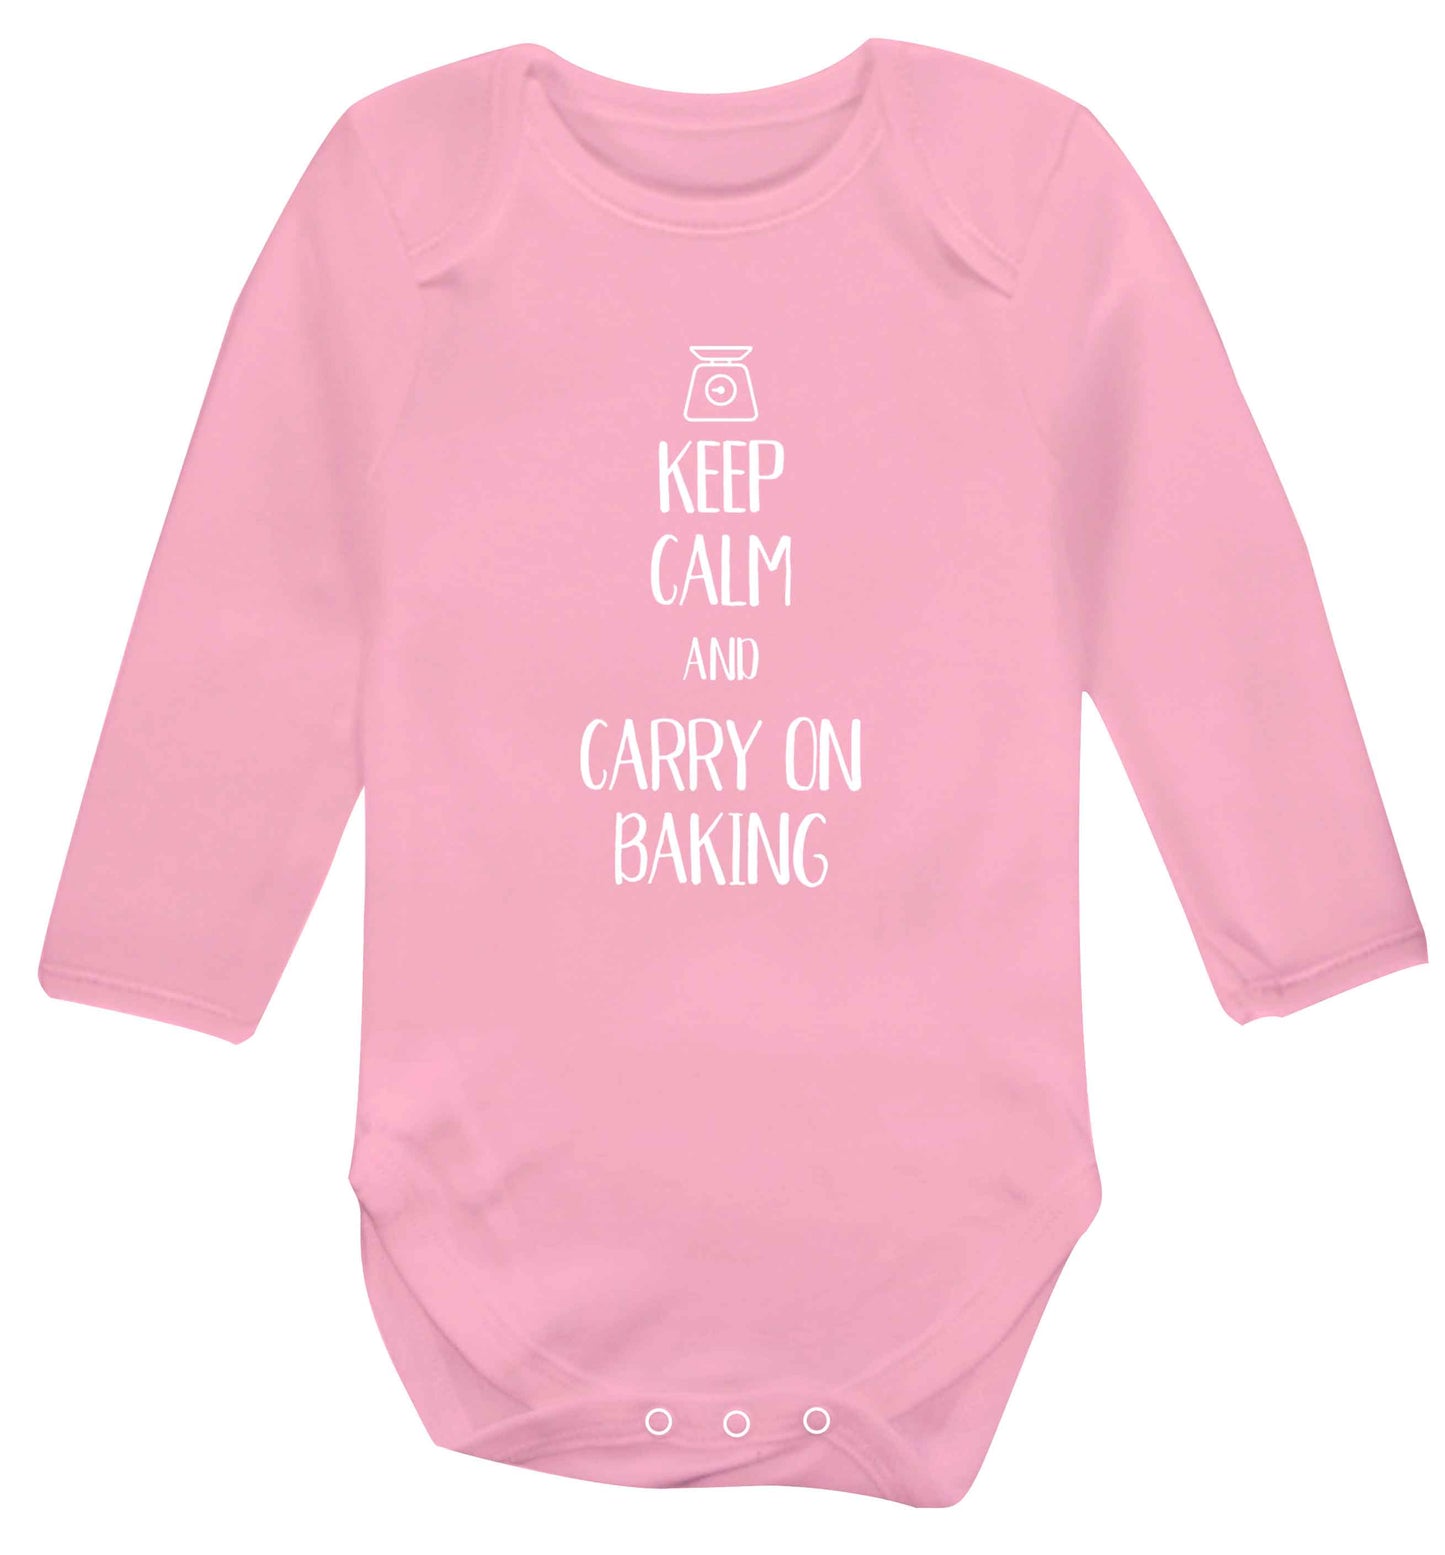 Keep calm and carry on baking Baby Vest long sleeved pale pink 6-12 months